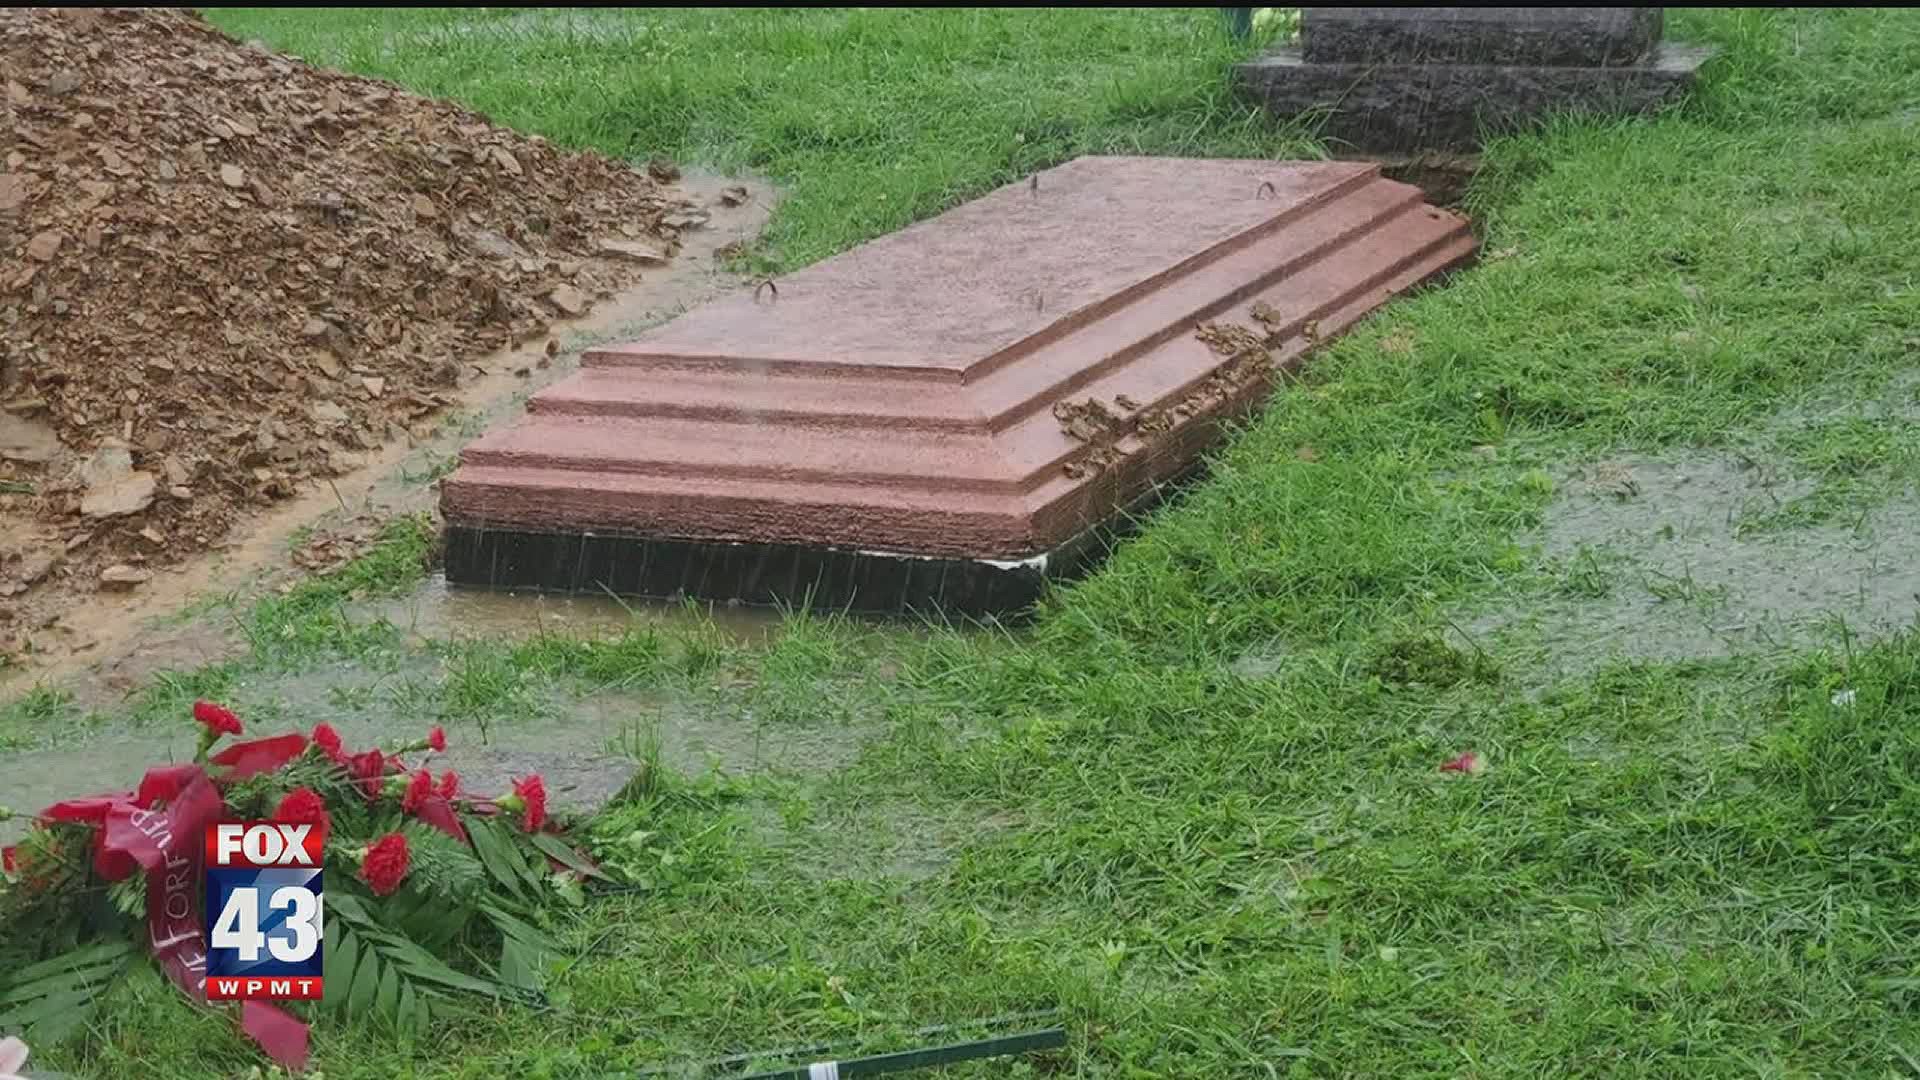 A picture that made its rounds on social media showing a flooded burial vault has many people wondering who is responsible.